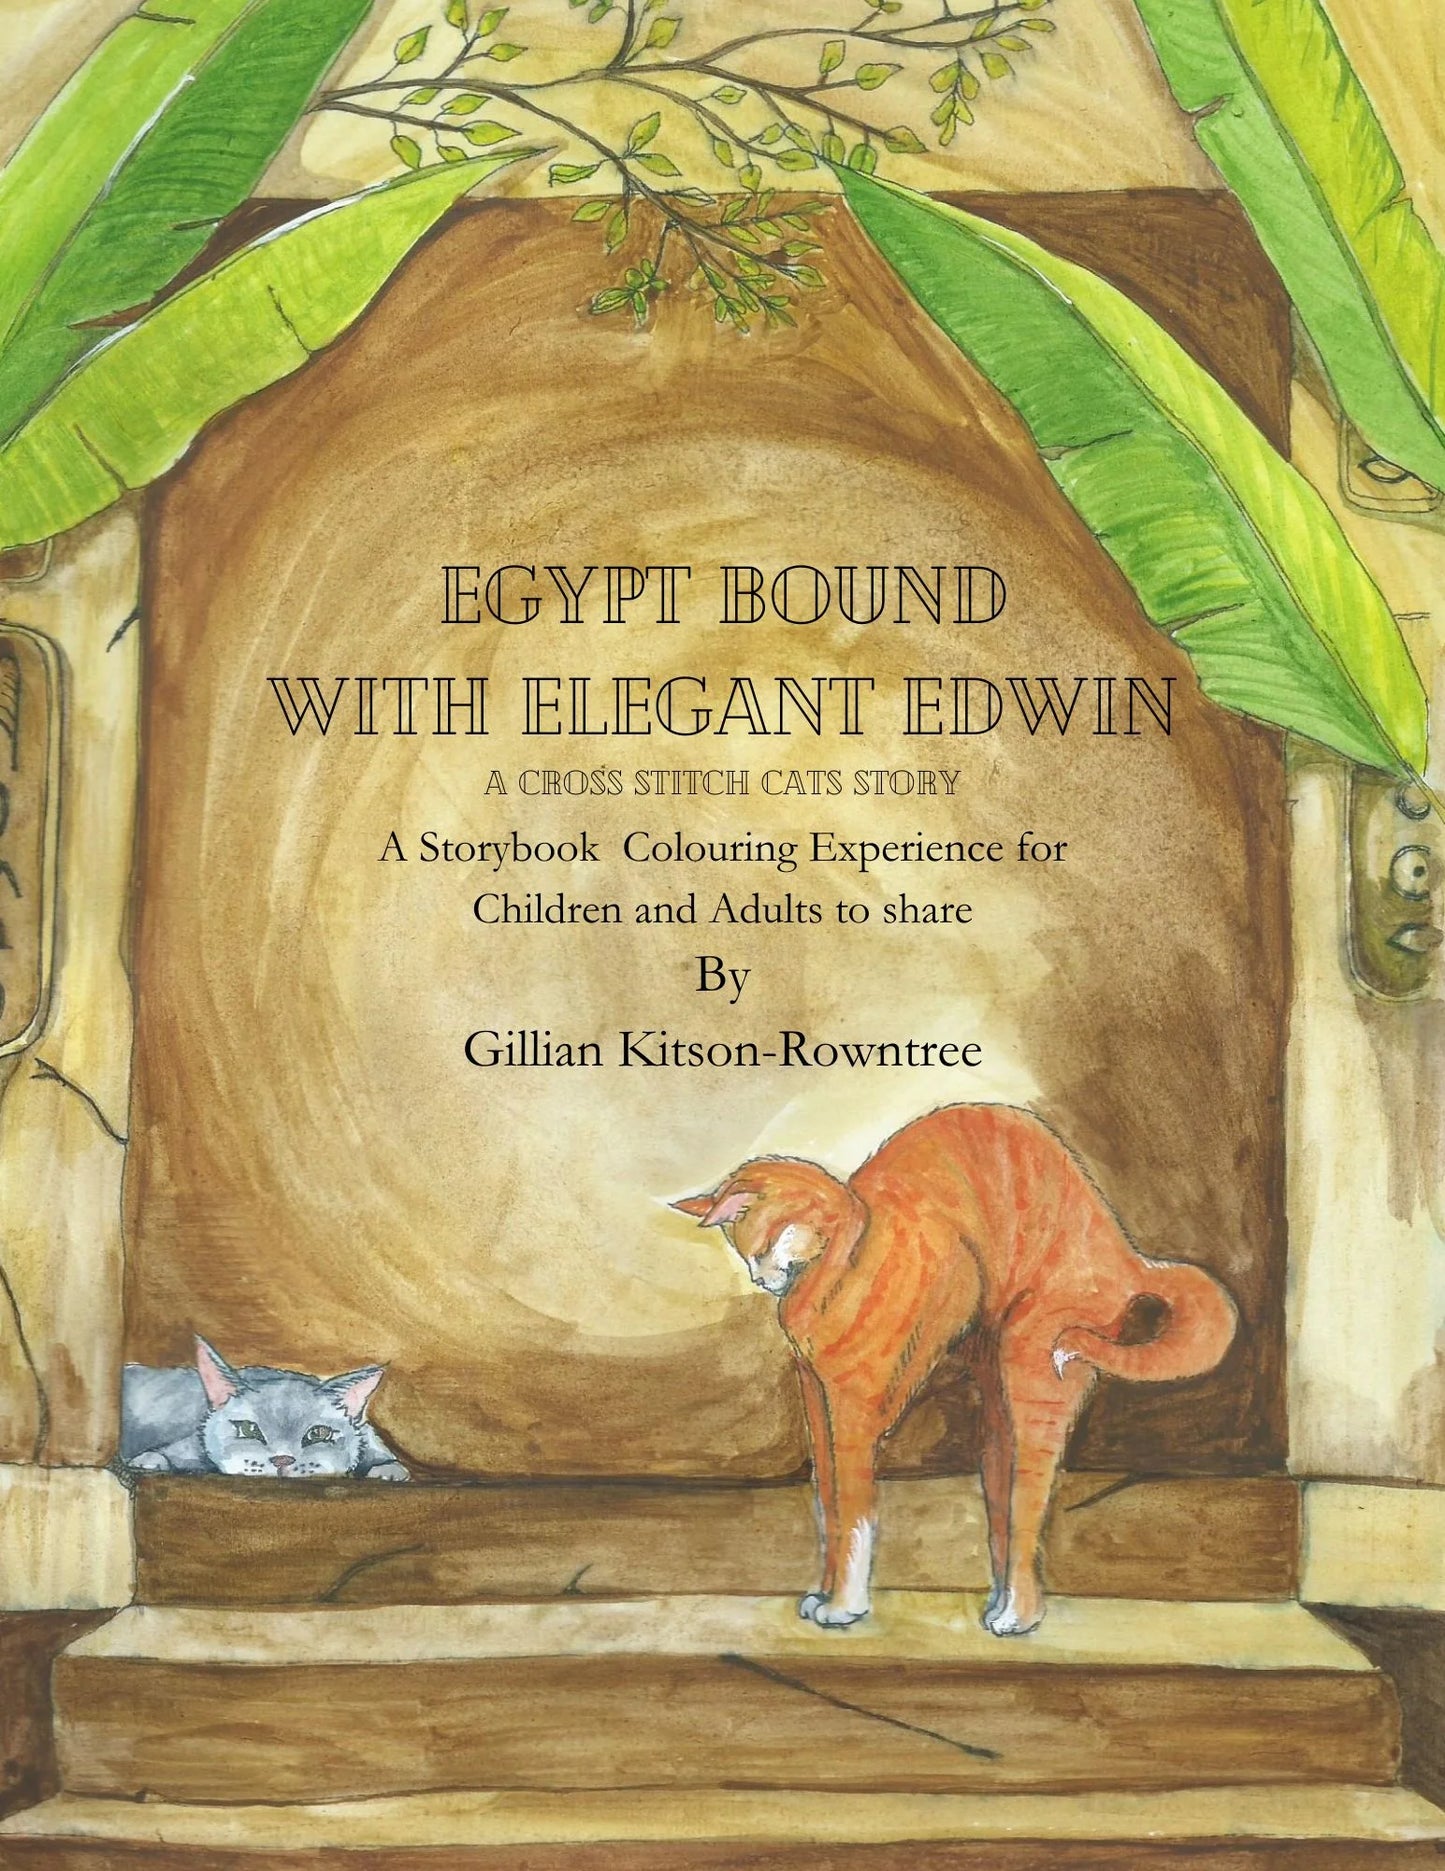 'Egypt Bound with Elegant Edwin' - A Storybook Colouring Experience for Children and Grown-ups